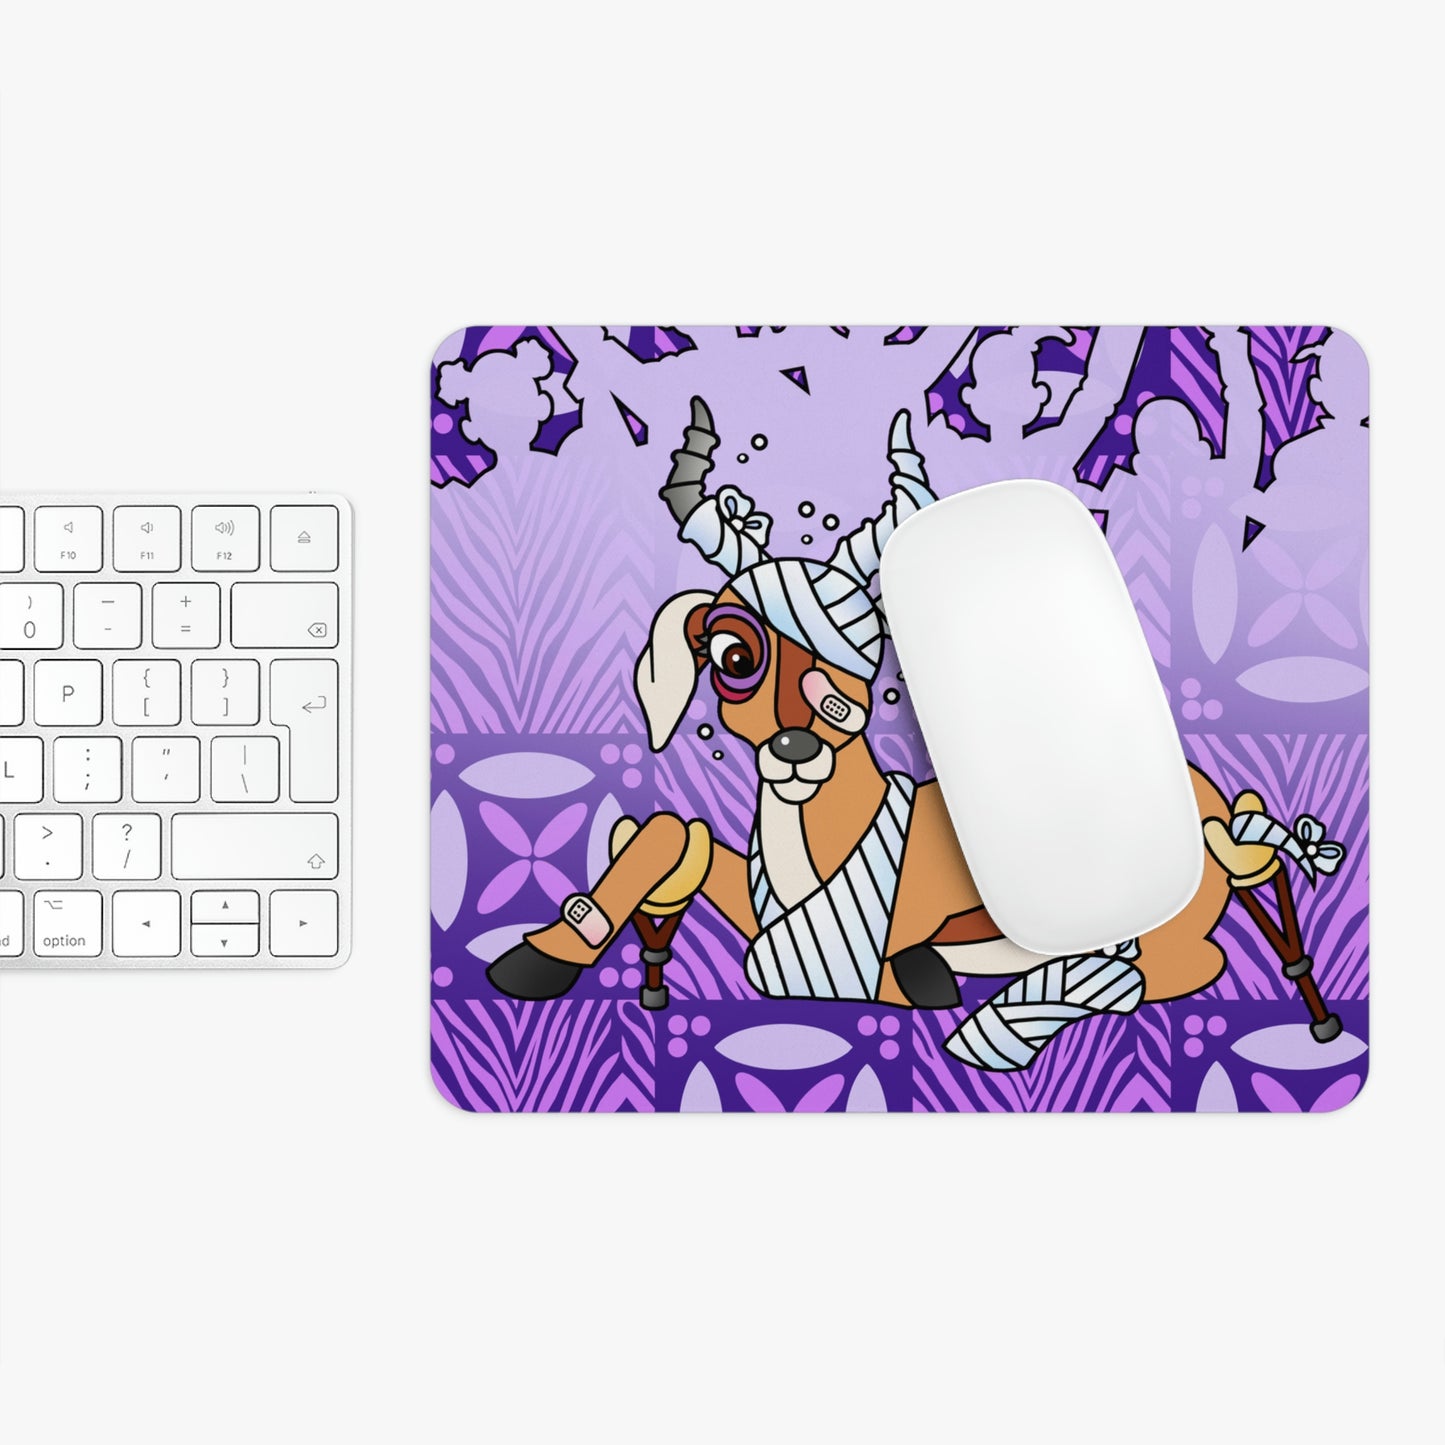 The Day that Goso Fell! Rectangle Mouse Pad